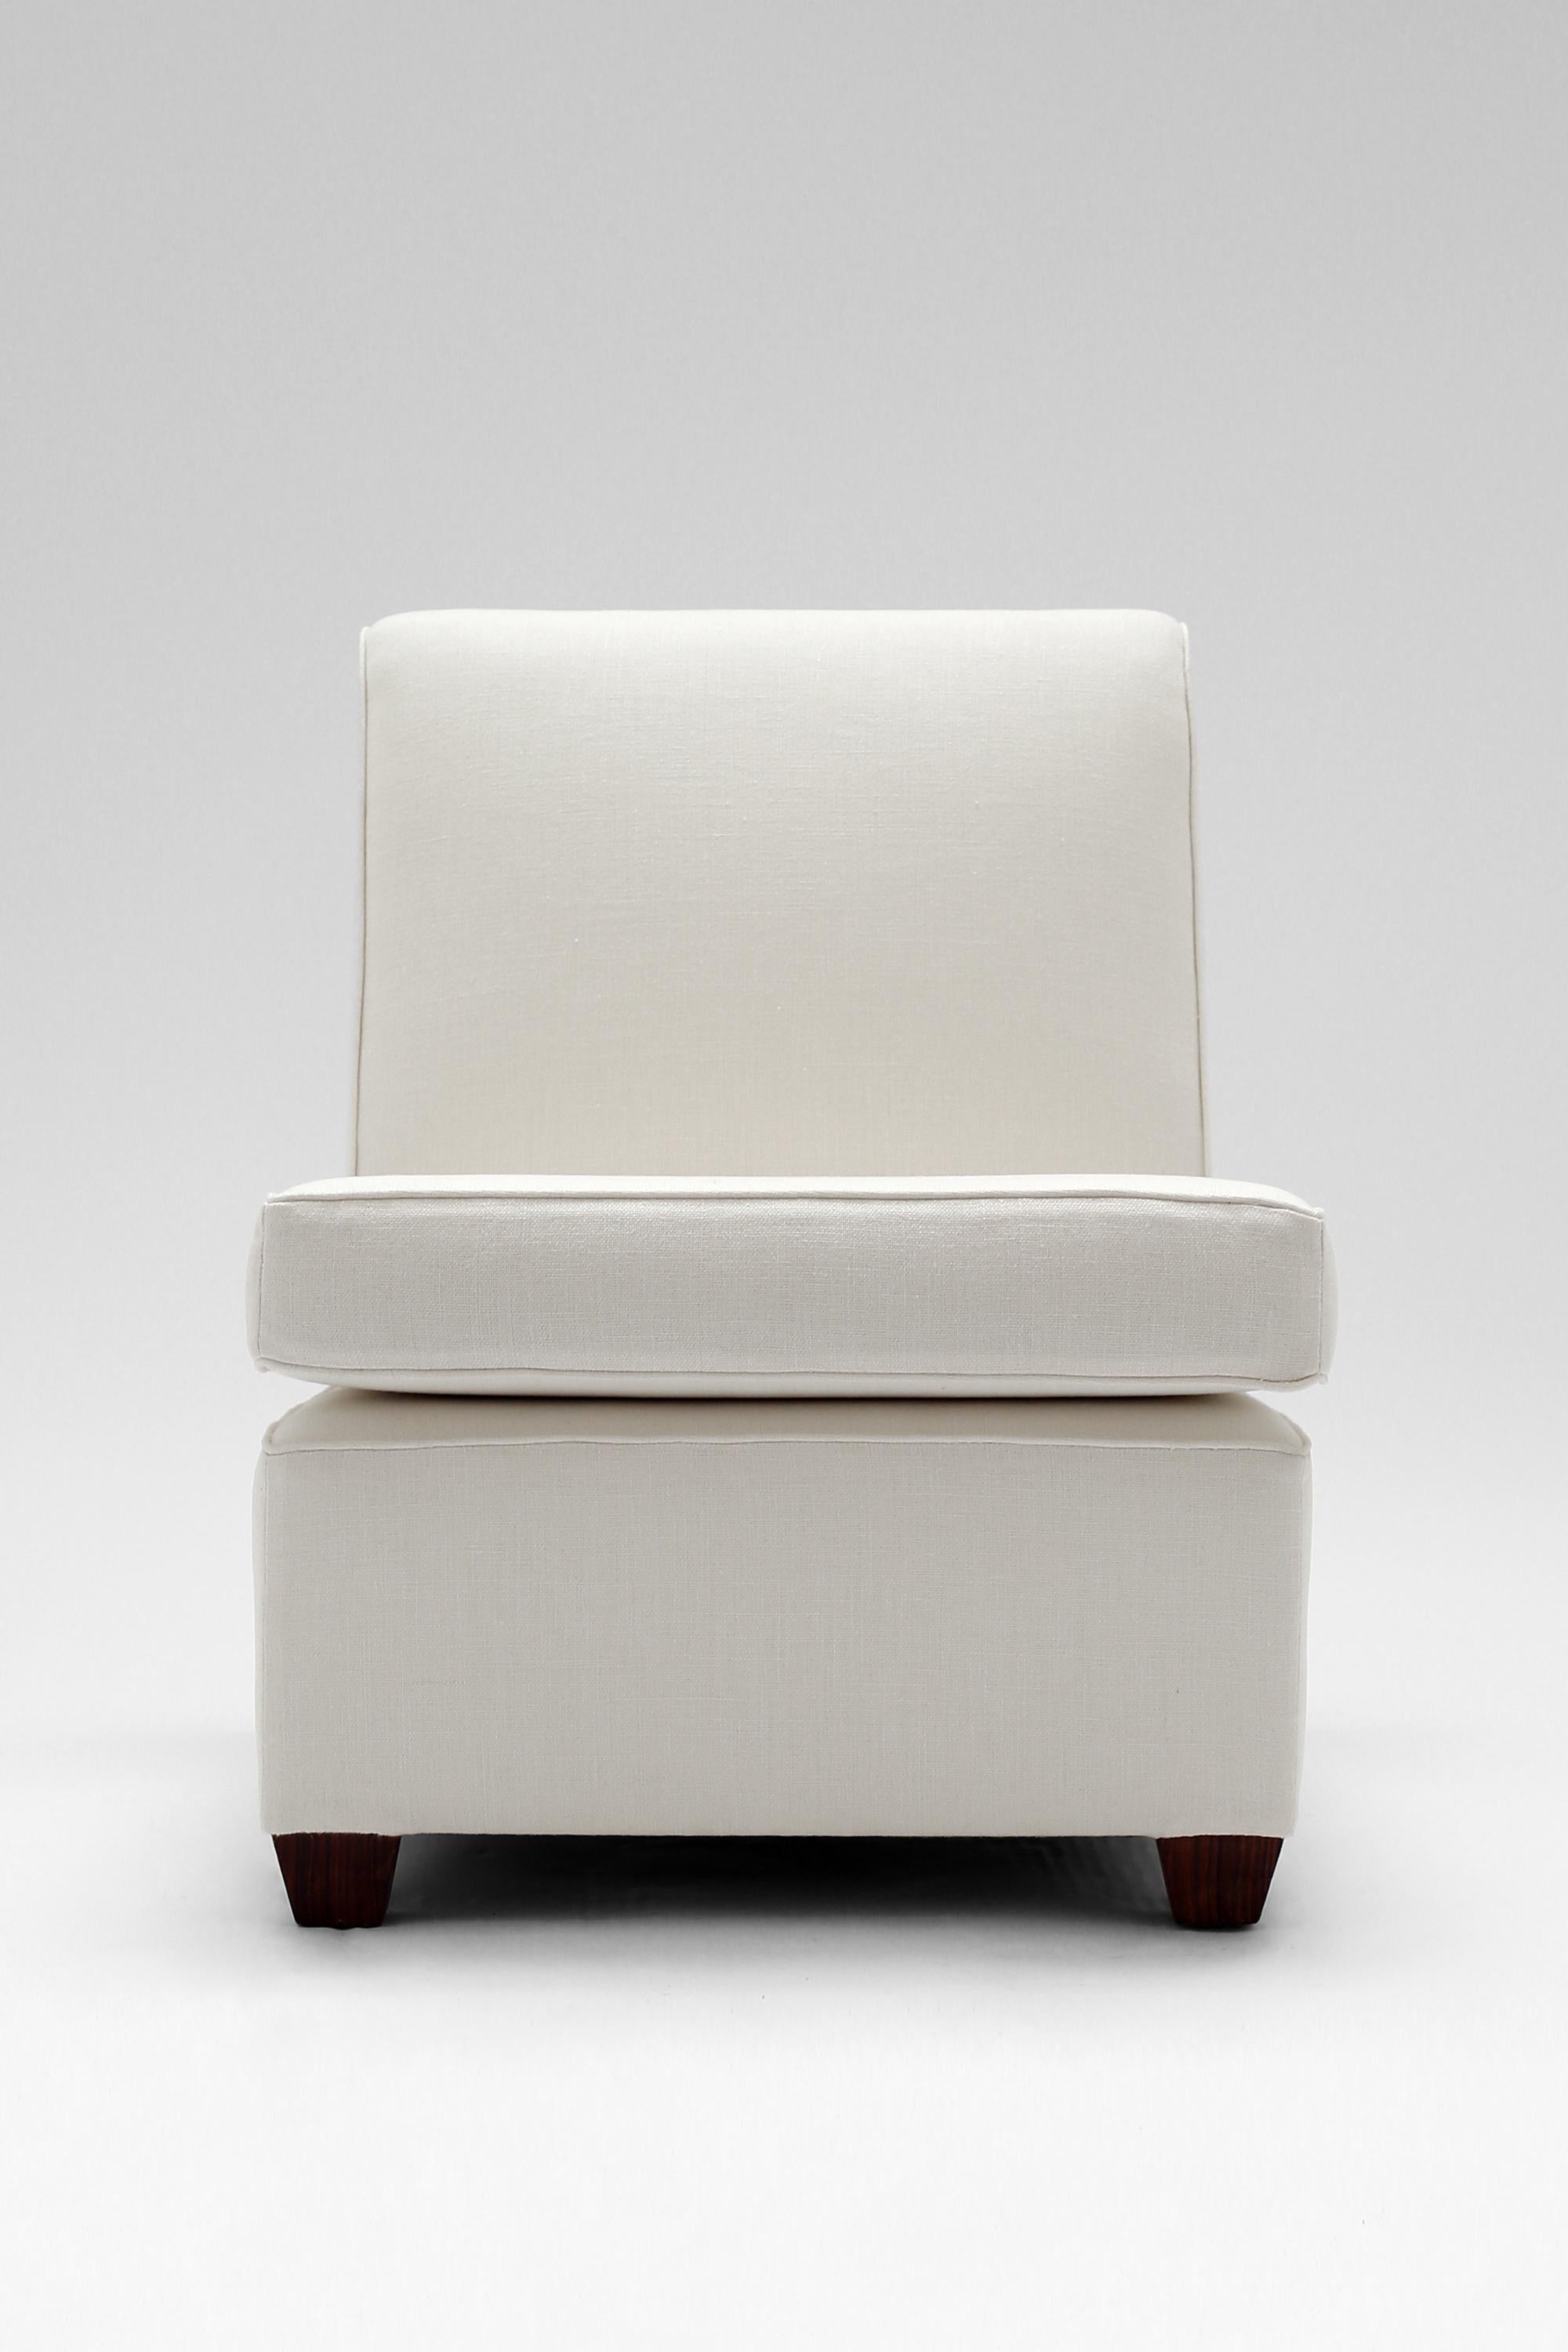 An Art Deco fireside chair or chauffeuse in the manner of Jacques Adnet. Featuring a double sprung seat and block feet veneered in Macassar. Rebuilt and newly reupholstered in white linen. French, c. 1940.